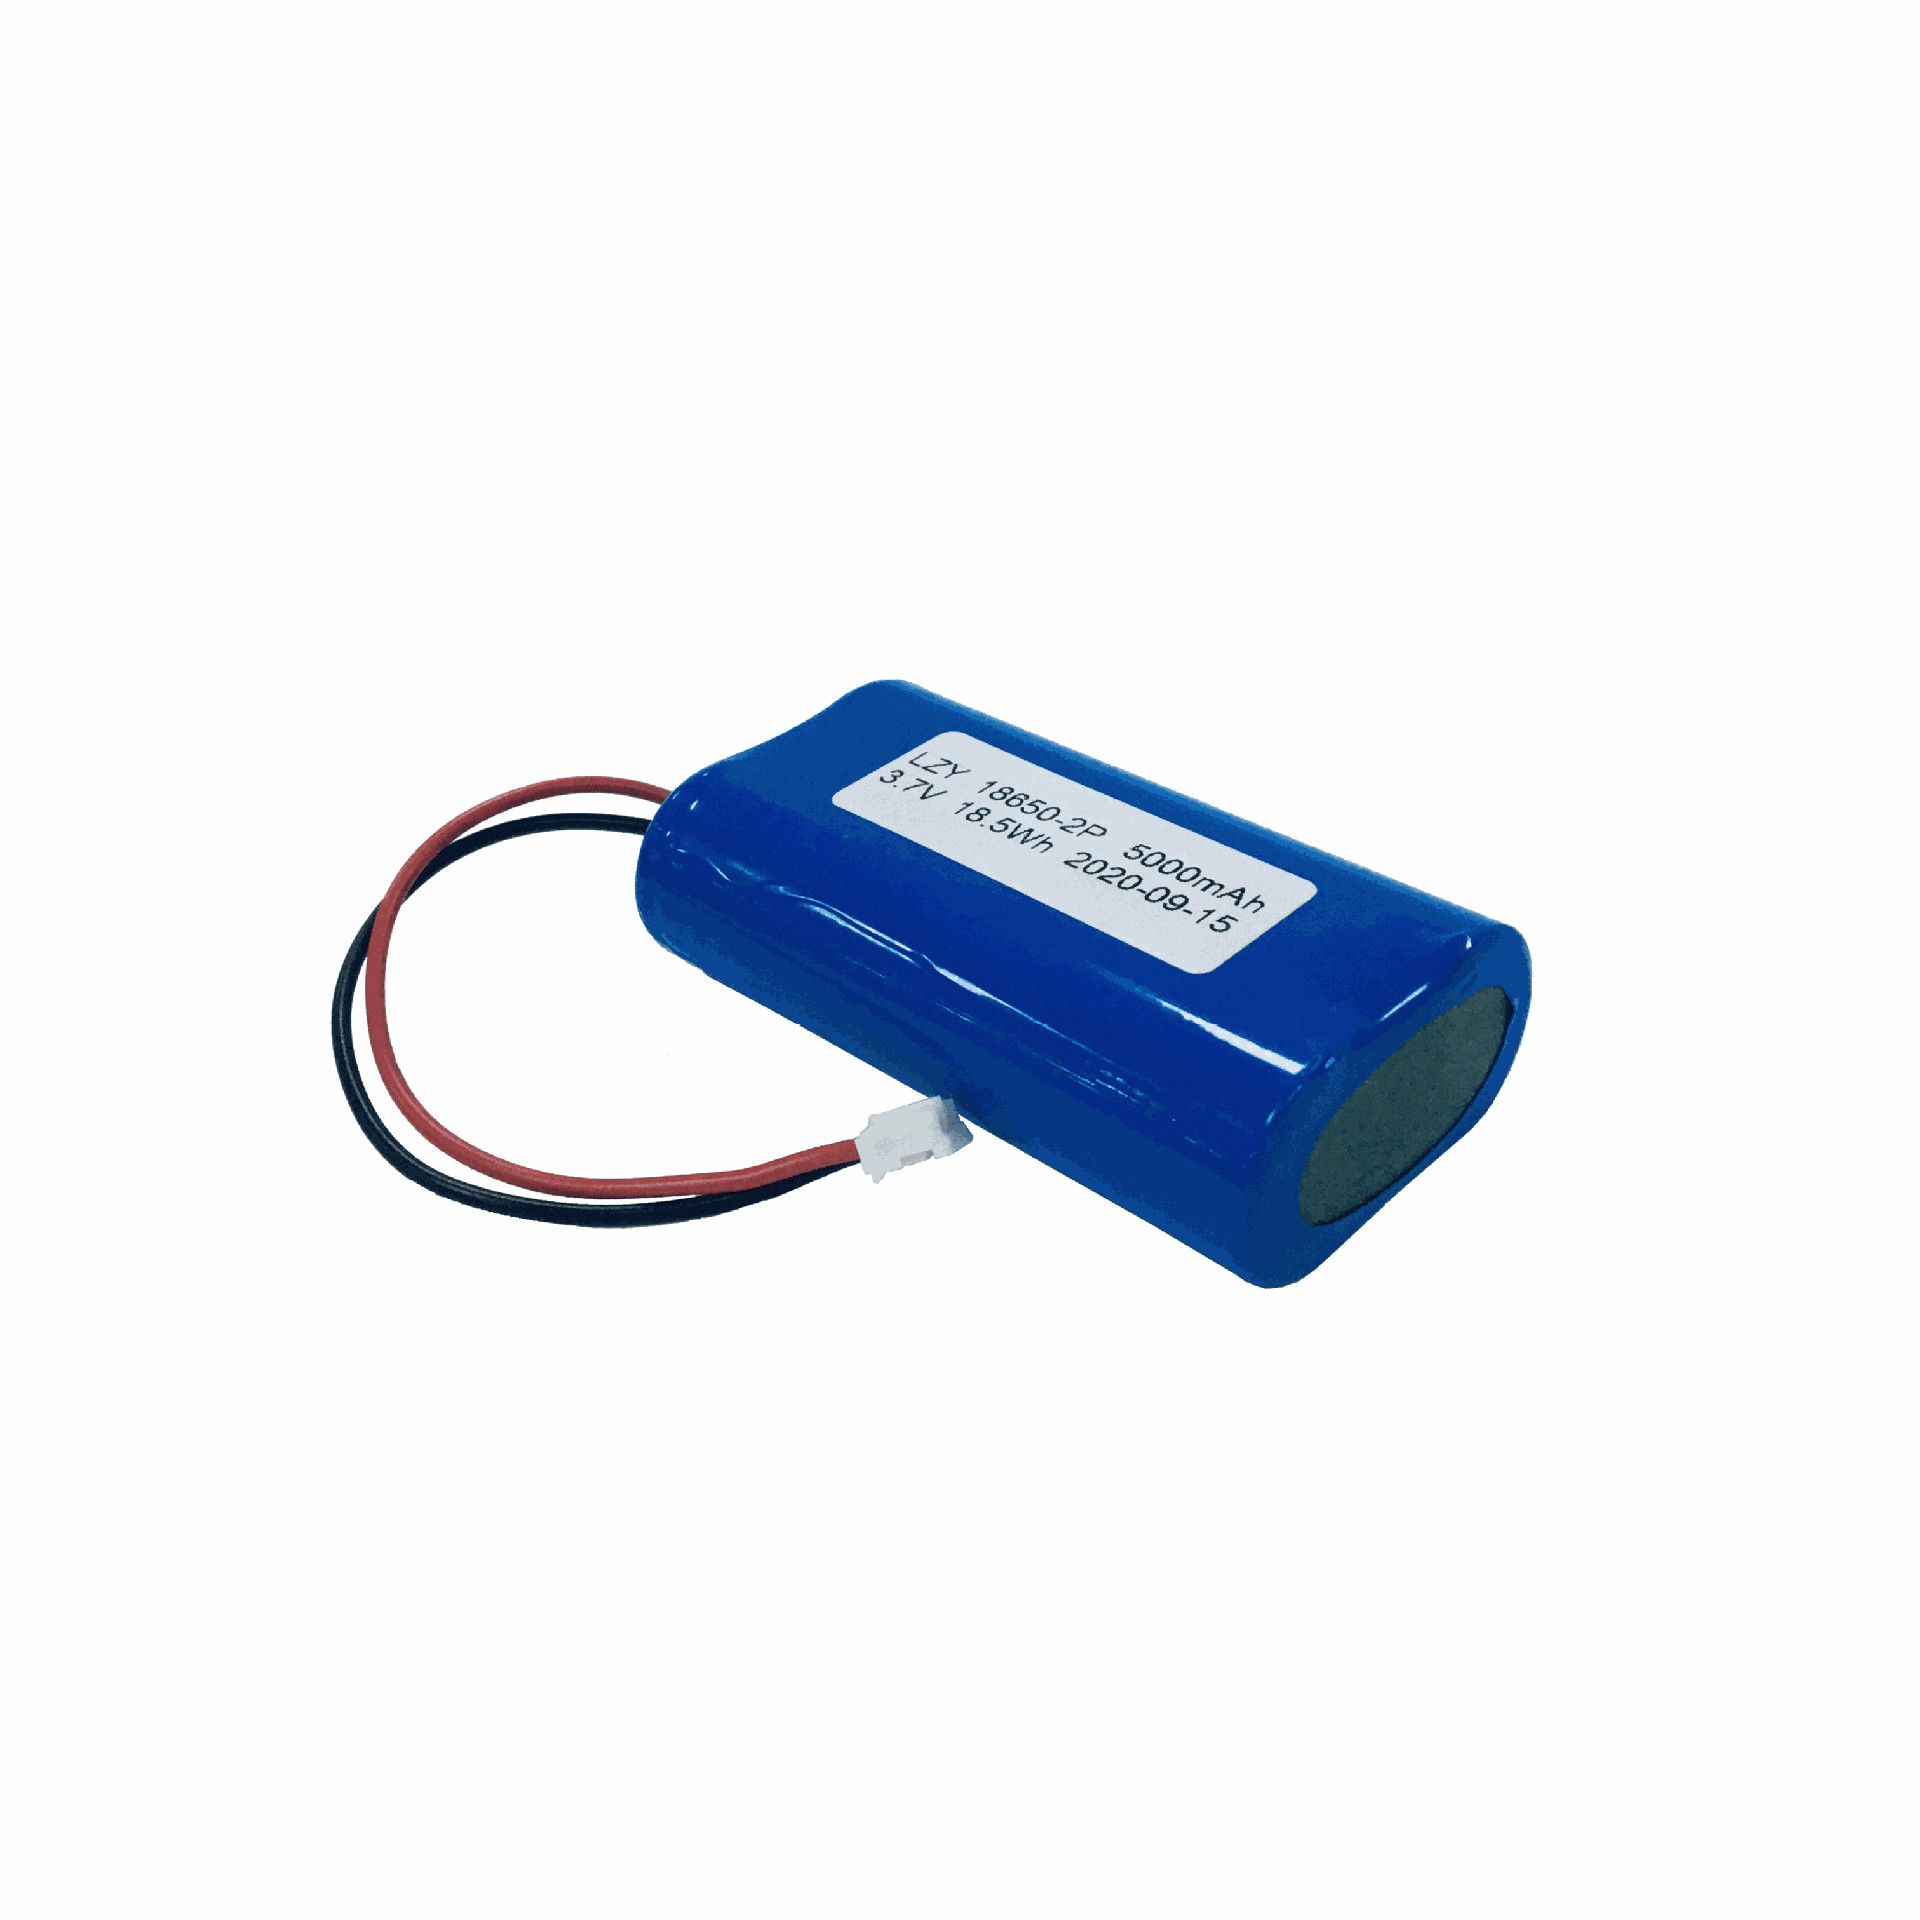  Pollution Free 5000mAh 18650 3.7 Volt Battery For Digital Product Manufactures